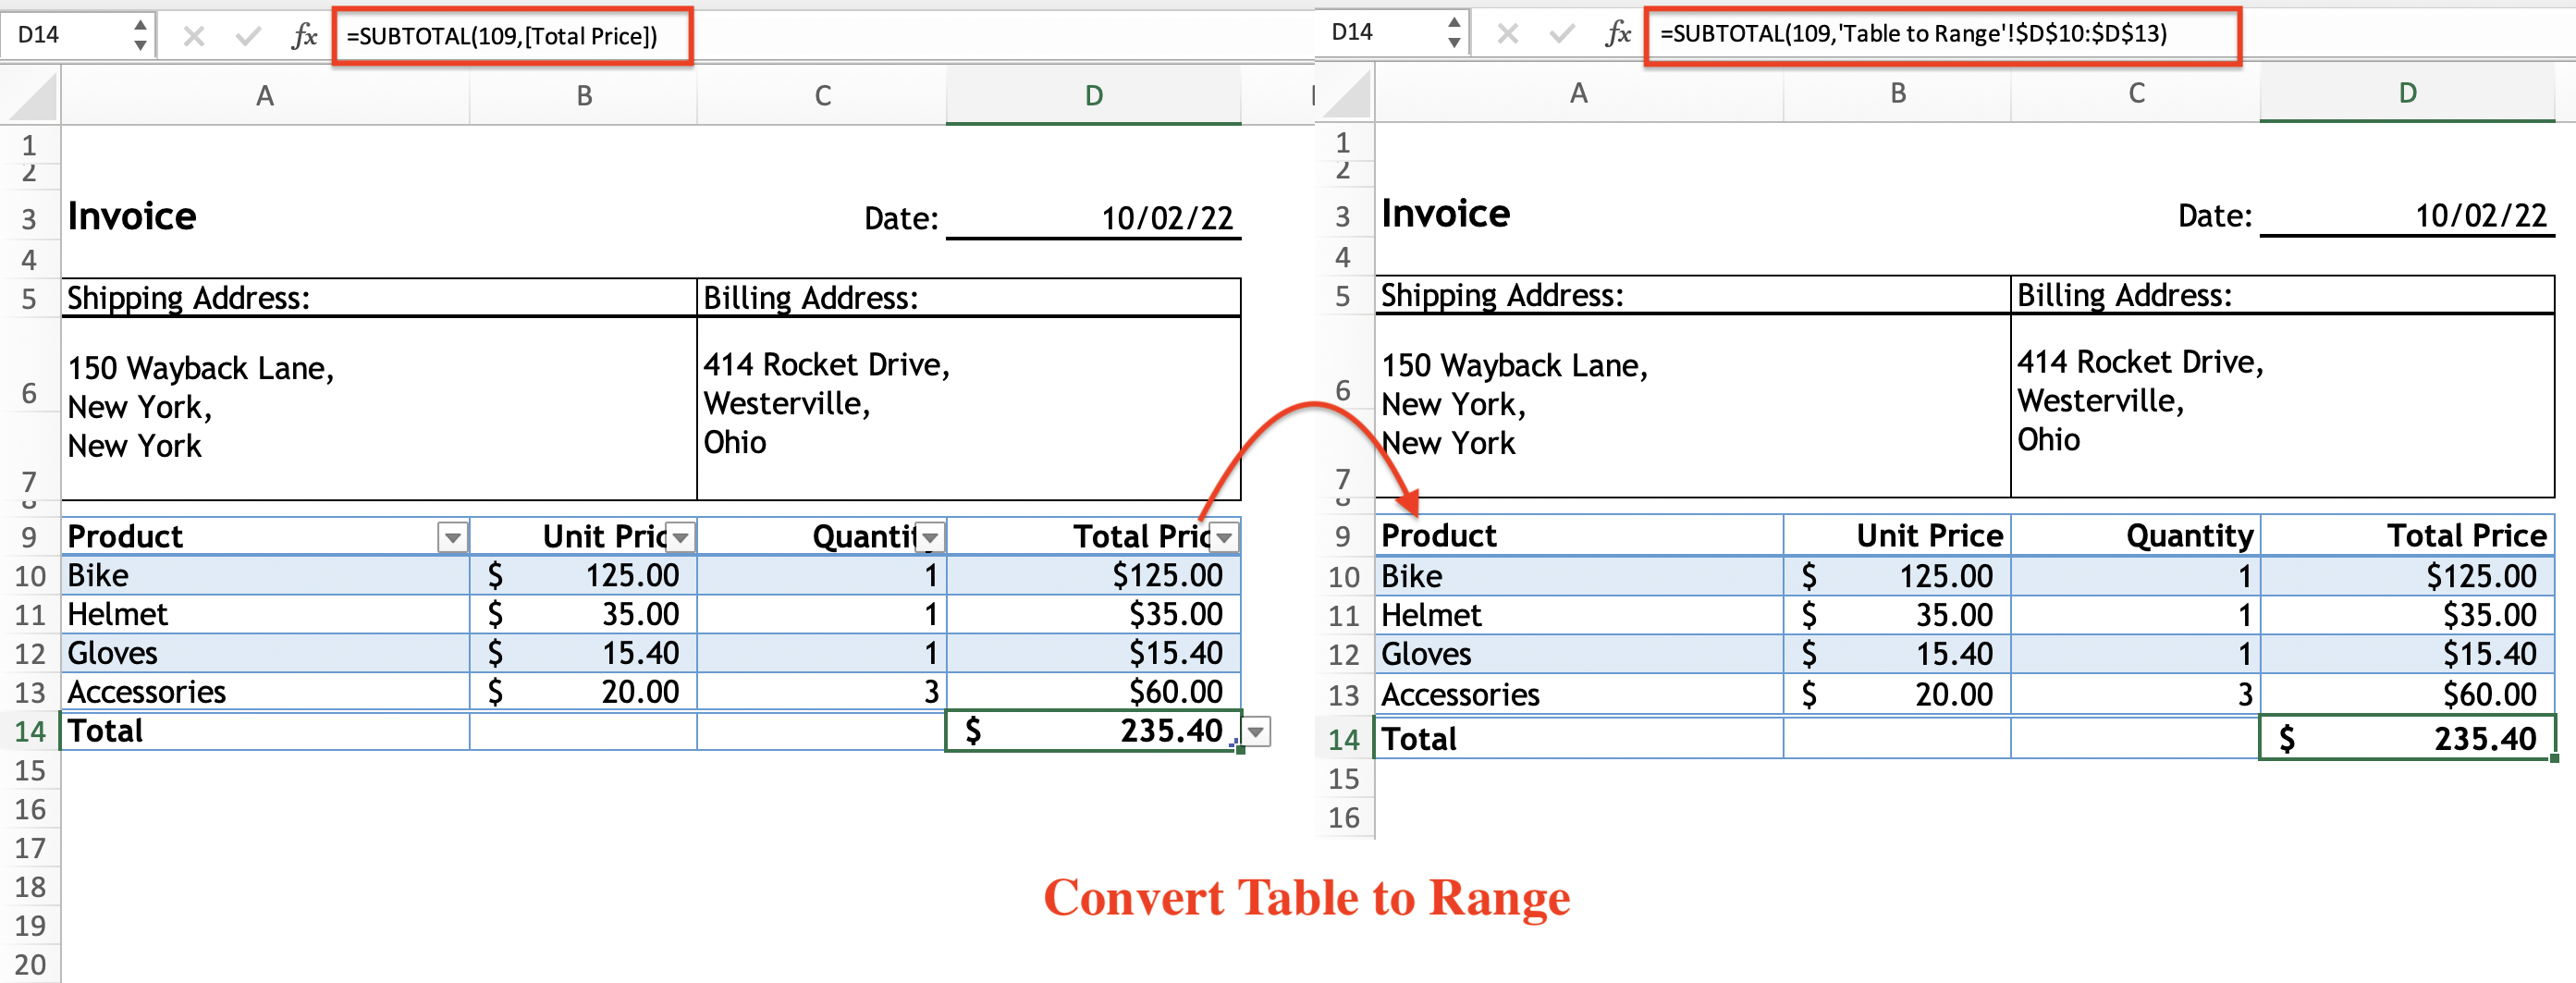 Convert Table to Range using GrapeCity Documents for Excel .NET v5.1